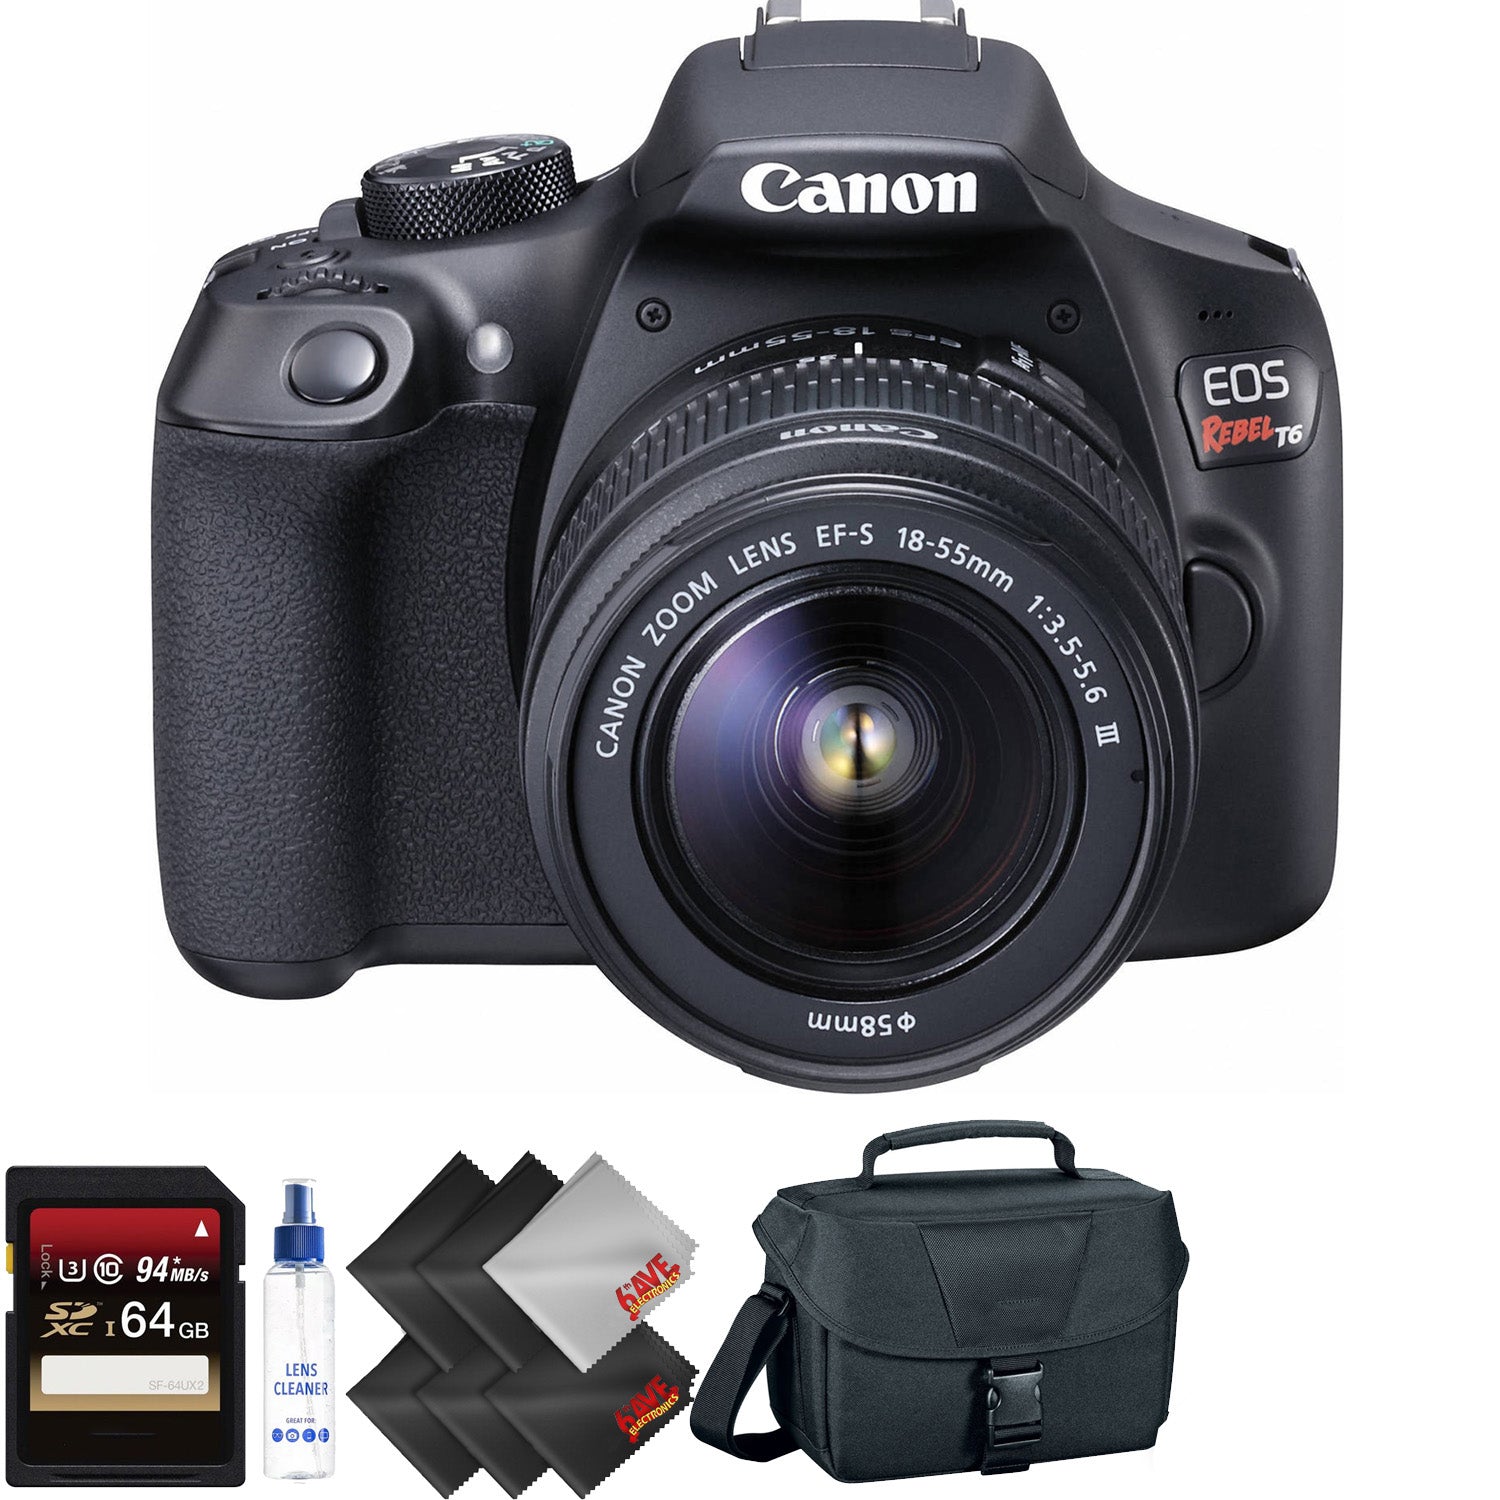 Canon EOS Rebel T6 DSLR Camera with 18-55mm and 75-300mm Lenses Kit + 64GB Memory Card + 1 Year Warranty Bundle